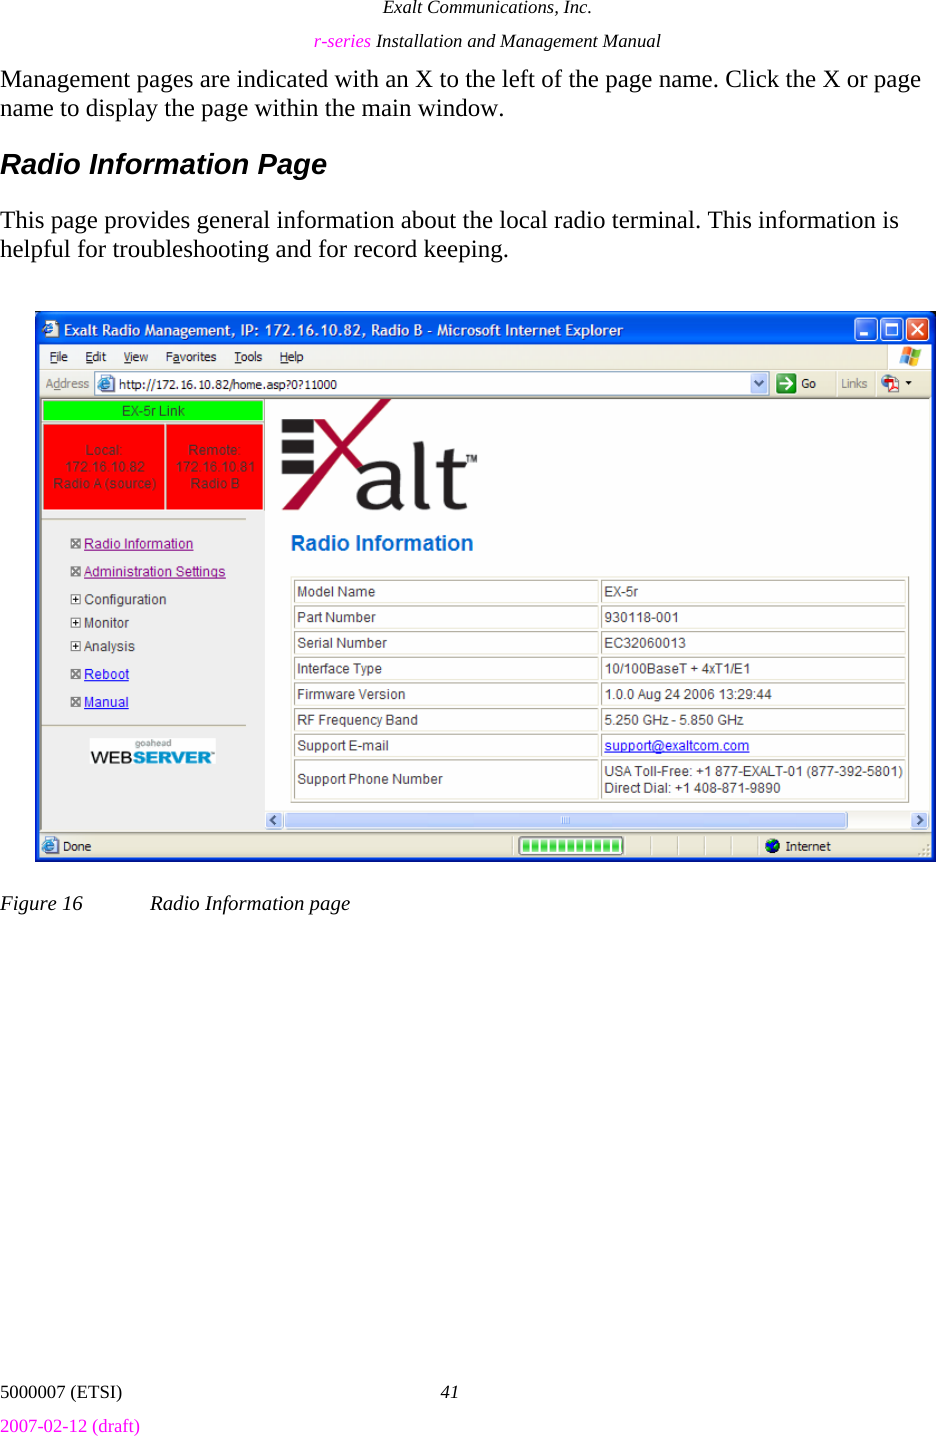 Exalt Communications, Inc. r-series Installation and Management Manual 5000007 (ETSI)  41 2007-02-12 (draft)  Management pages are indicated with an X to the left of the page name. Click the X or page name to display the page within the main window. Radio Information Page This page provides general information about the local radio terminal. This information is helpful for troubleshooting and for record keeping.  Figure 16  Radio Information page 